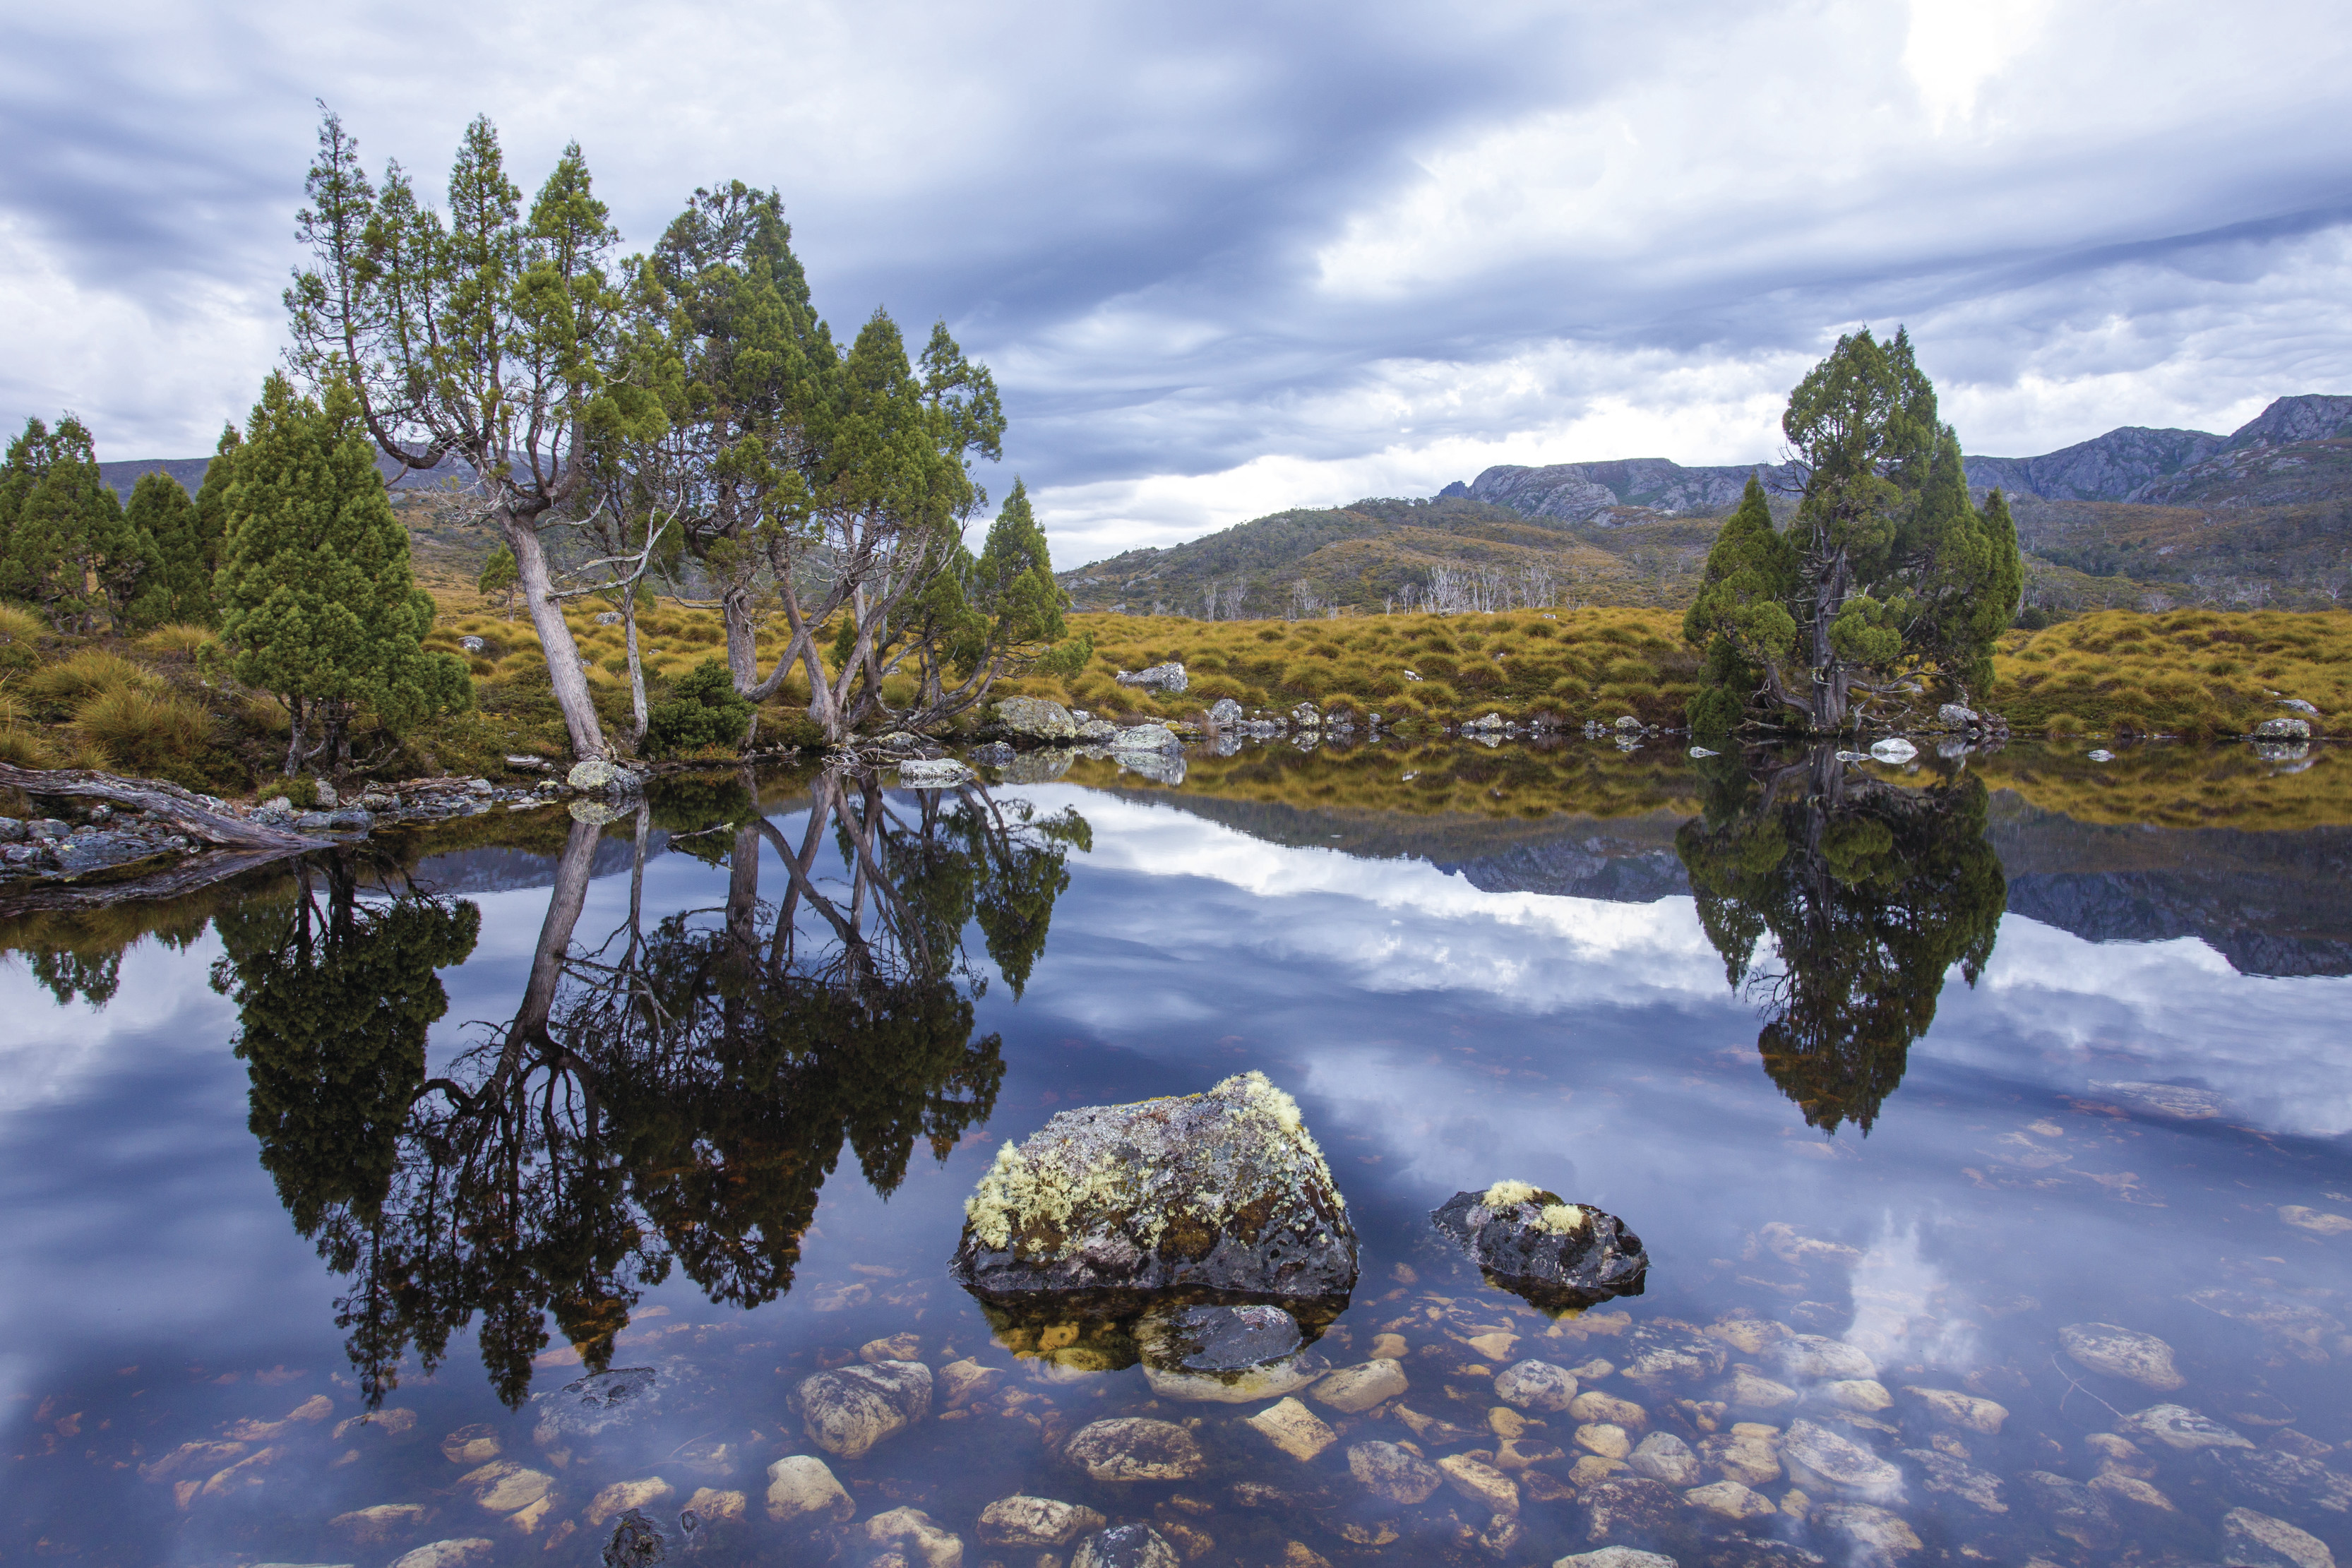 Incredible landscape image of Wombat Pool. Being able to see the reflections so clearly in the pool, surrounded by untouched nature.